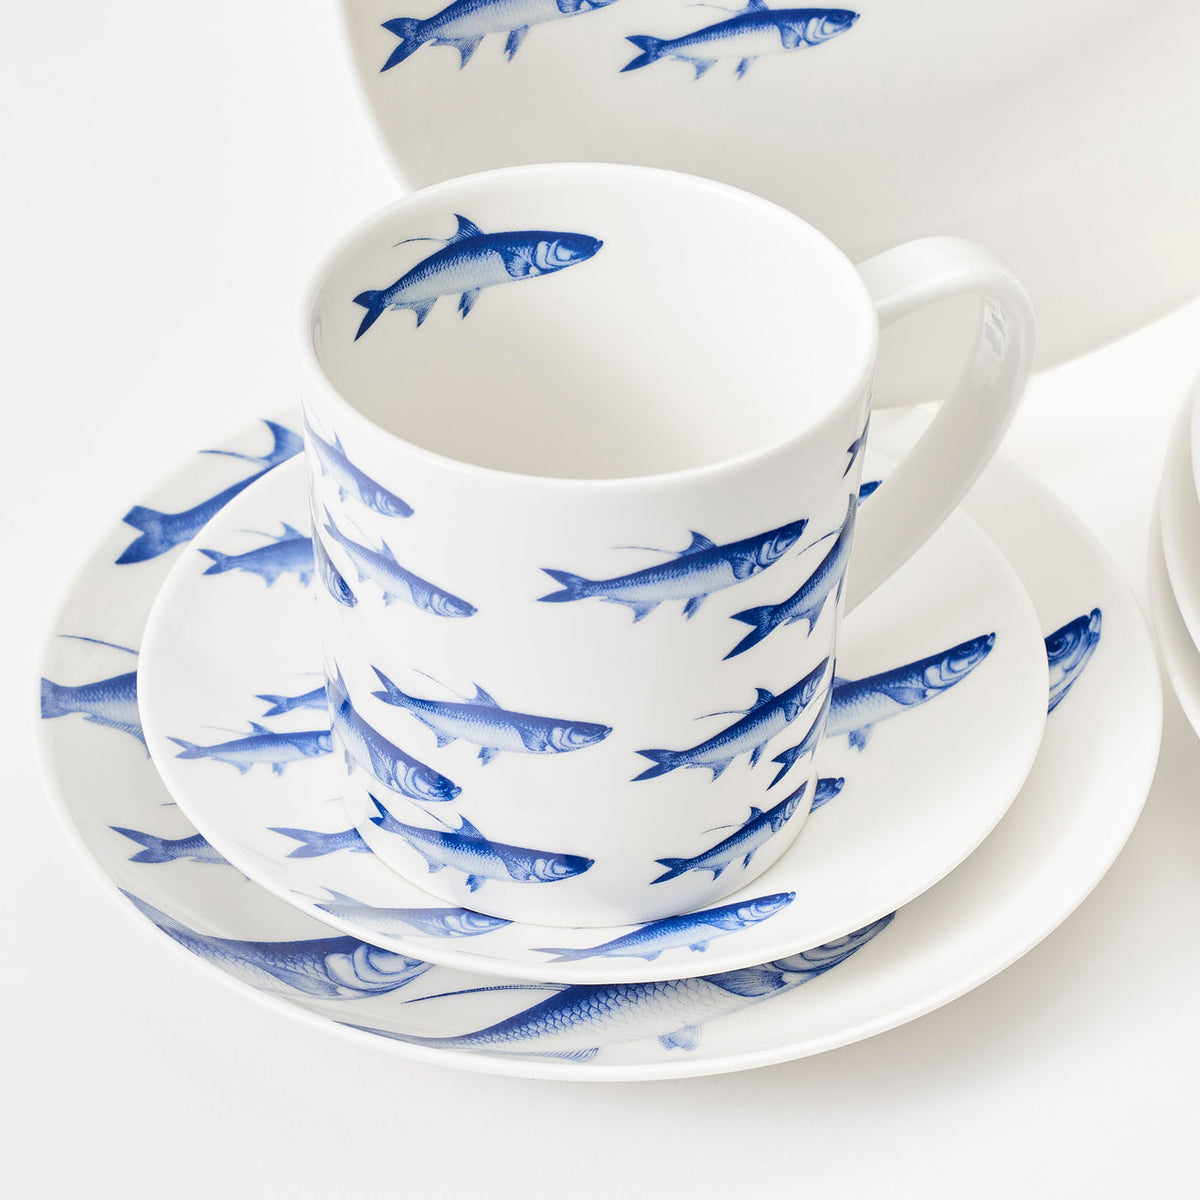 A porcelain set of blue and white plates and cups with fish on them, called the &quot;School of Fish Table for 4&quot; by Caskata.